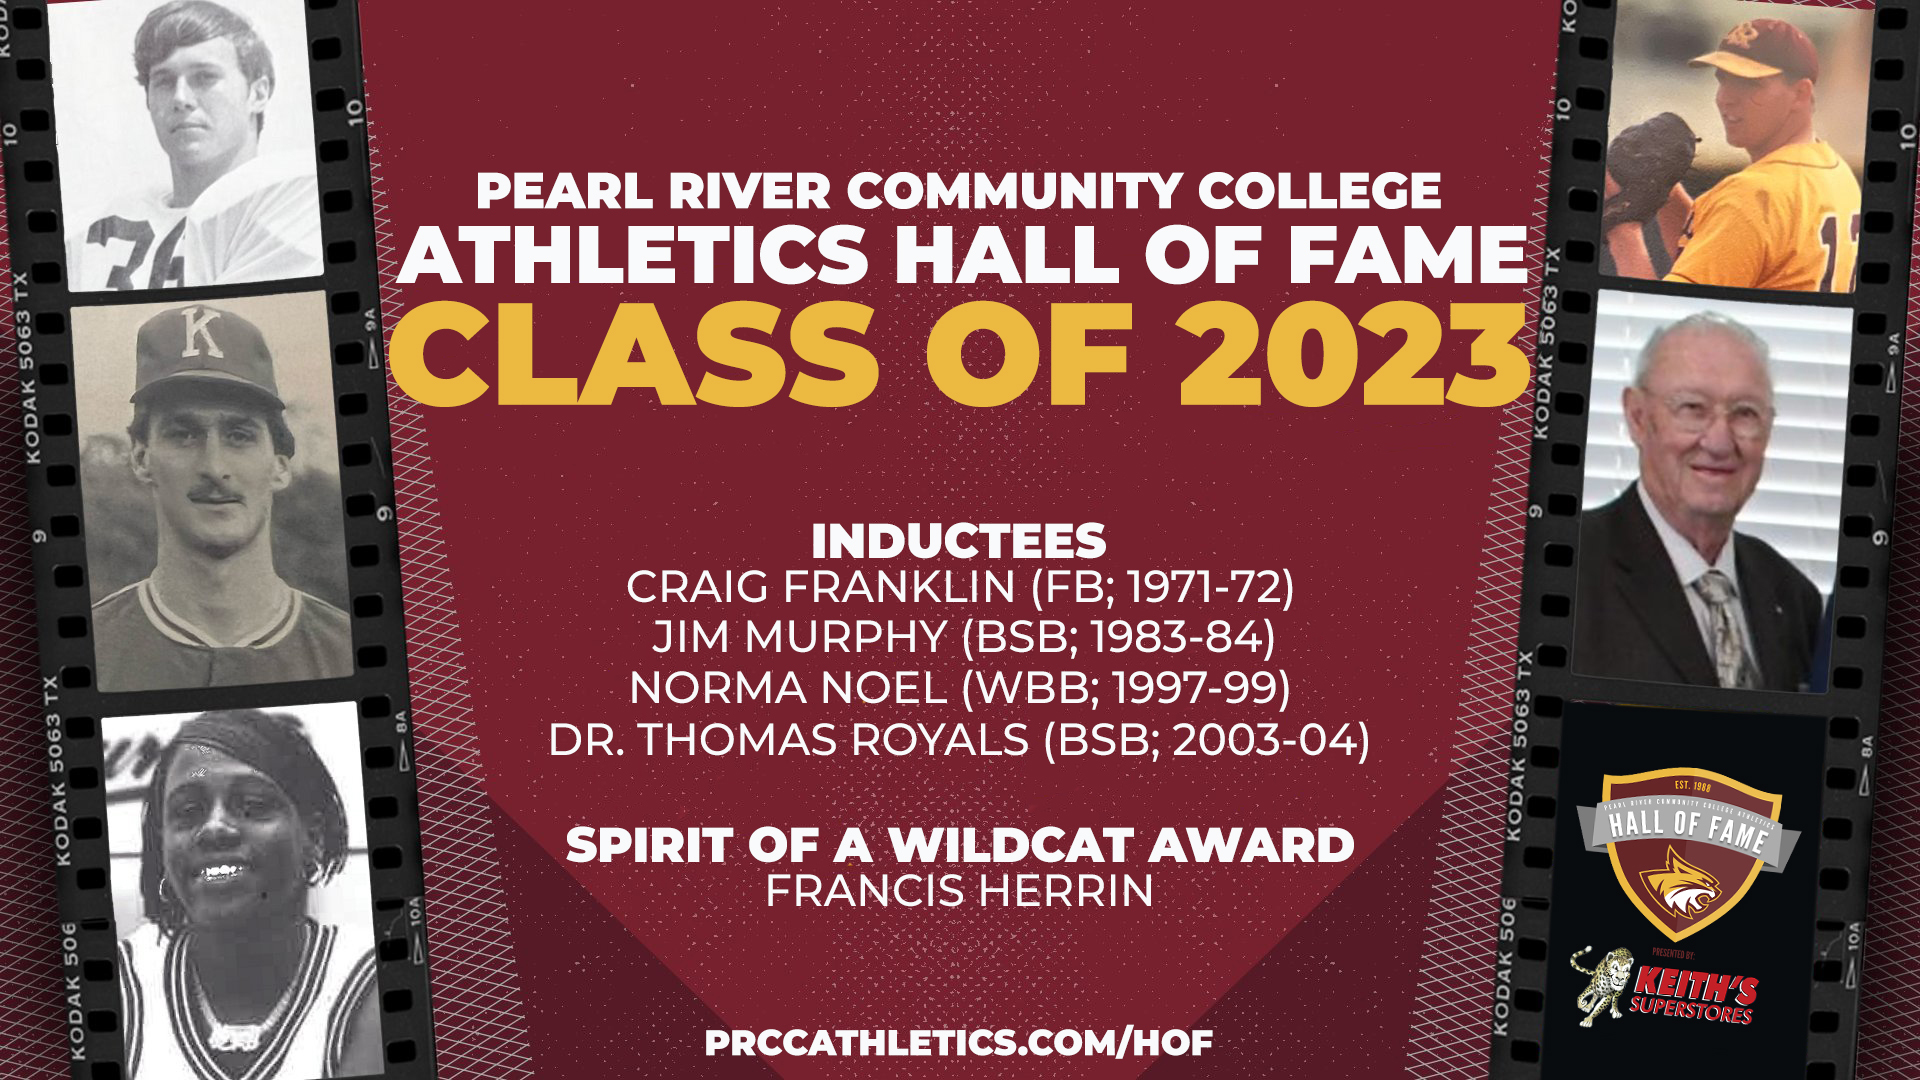 PRCC announces exciting 2023 Athletics Hall of Fame inductees